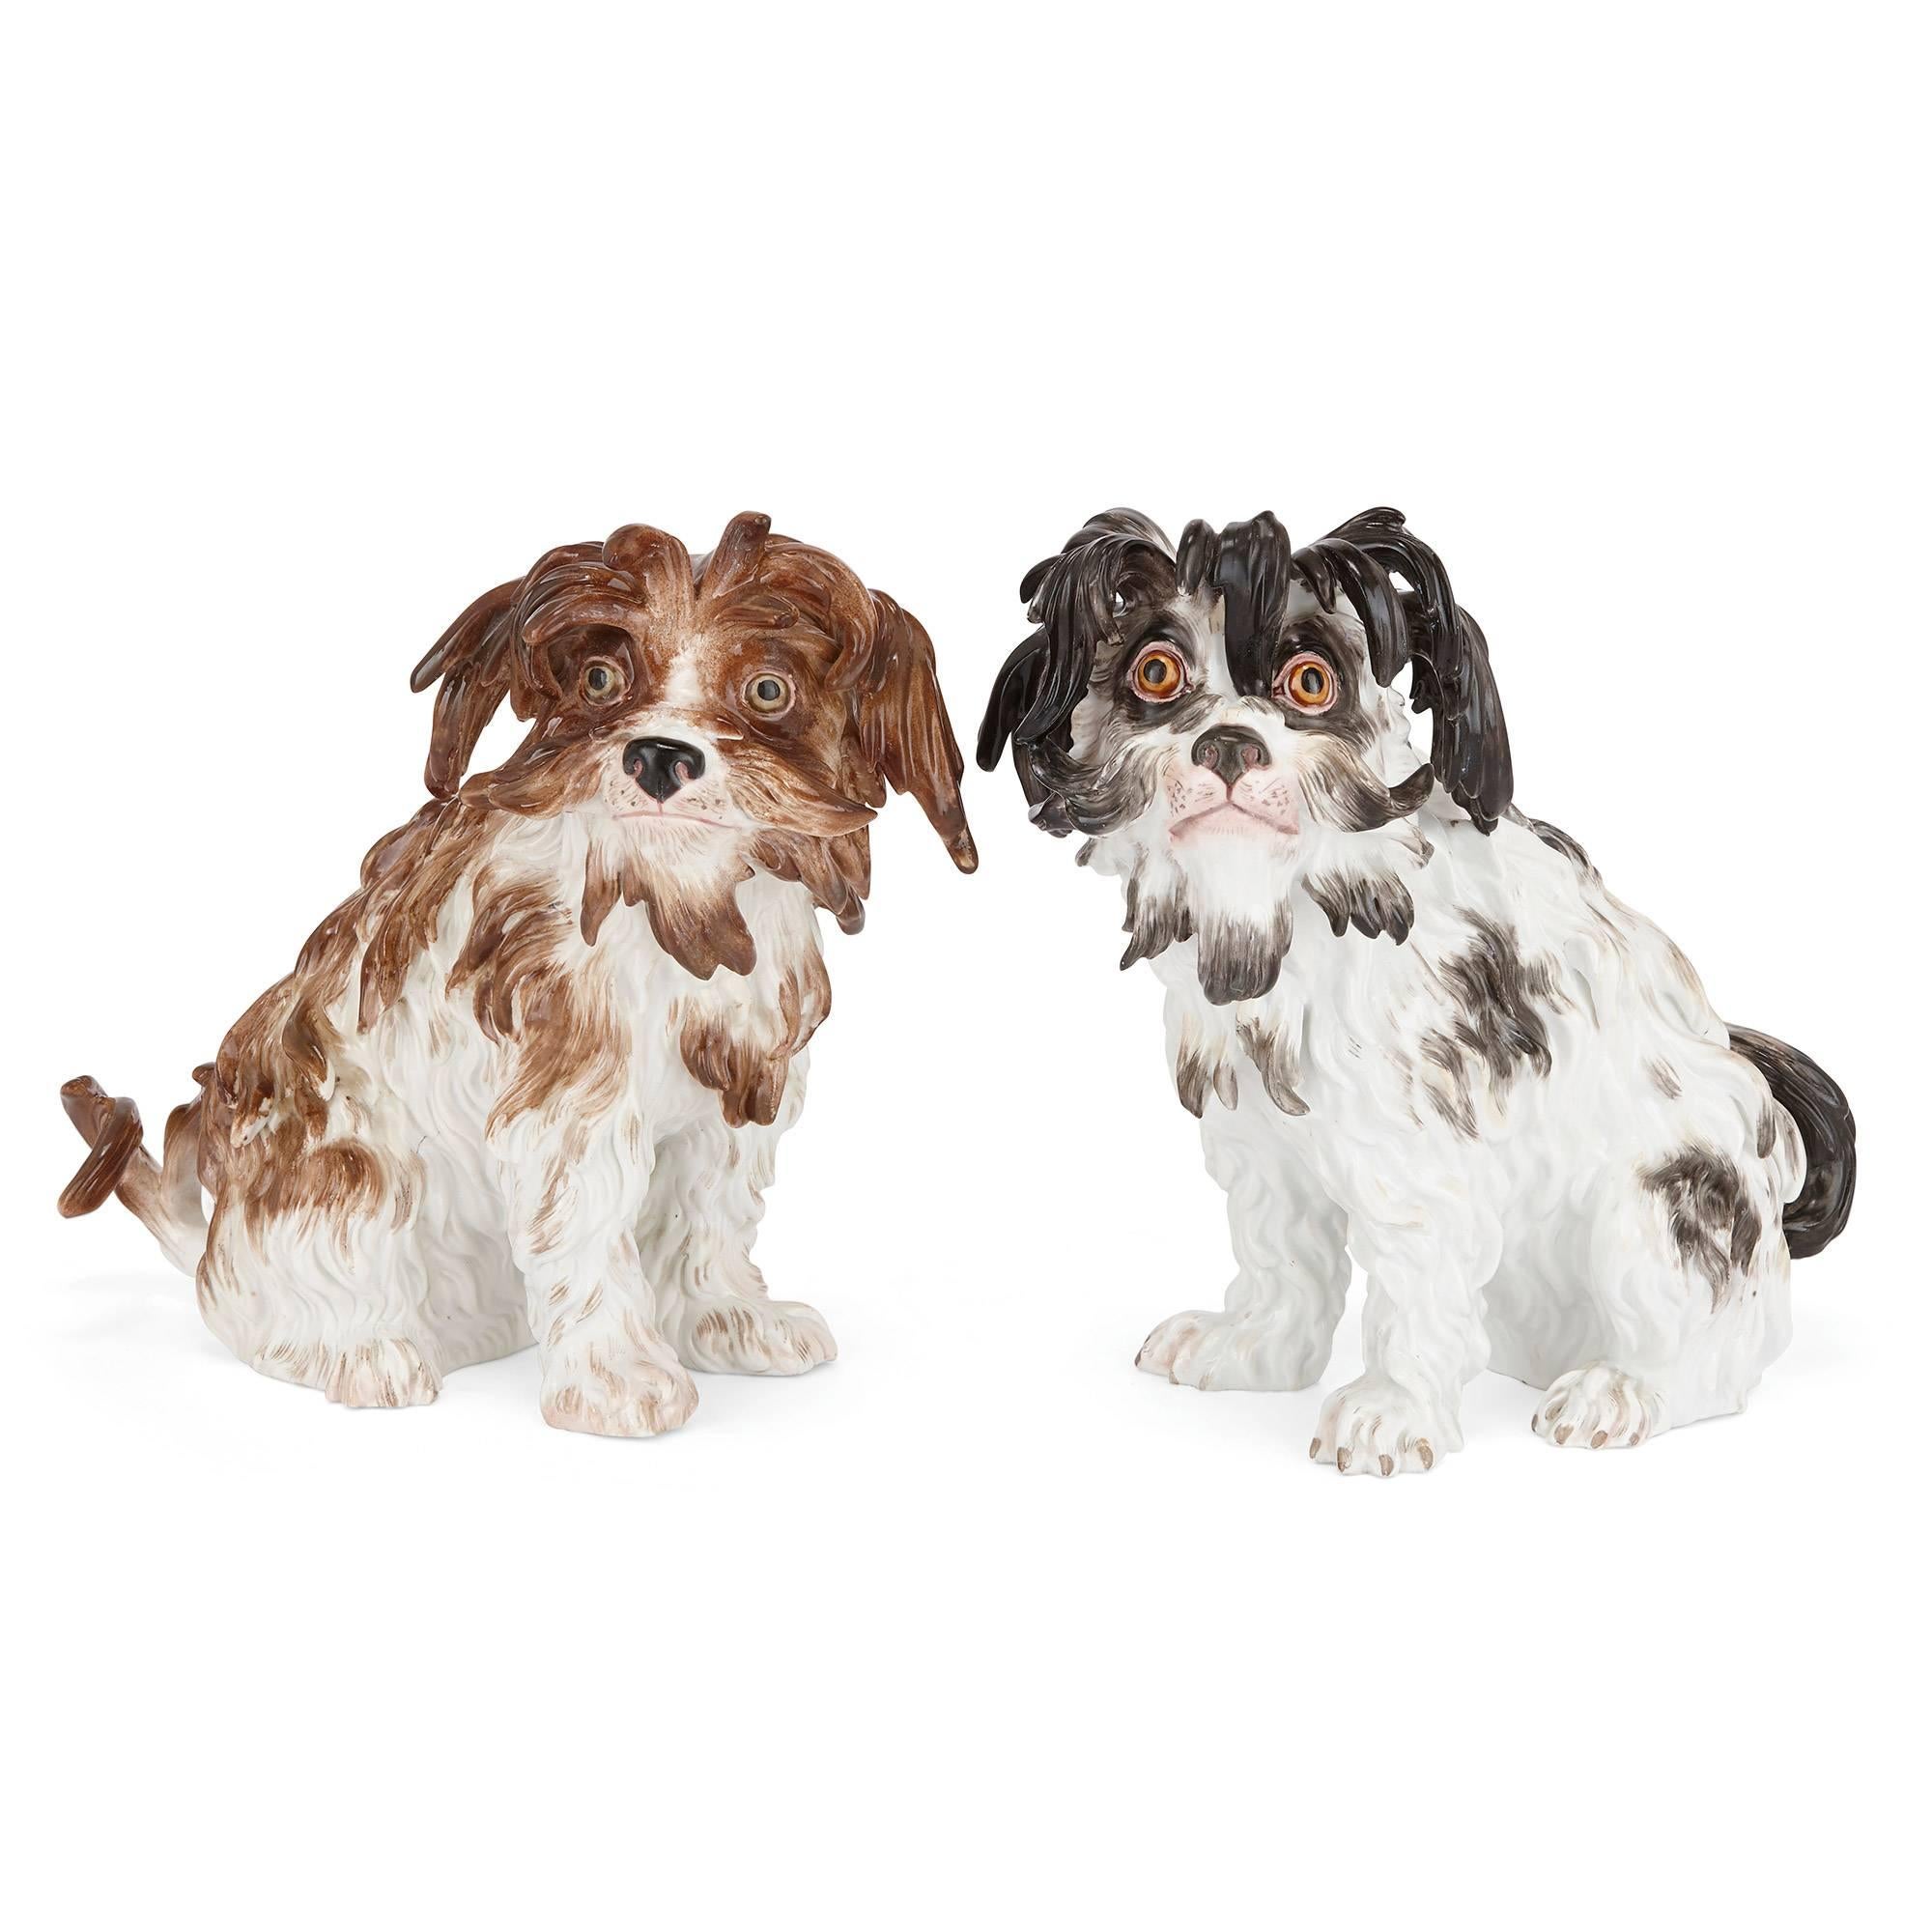 One dog with black and white fur, the other brown and white fur, both with relief moulding to the body, the bases marked in underglaze blue with inscribed marks of Meissen.

These charming model dogs, each depicted in impressive naturalistic